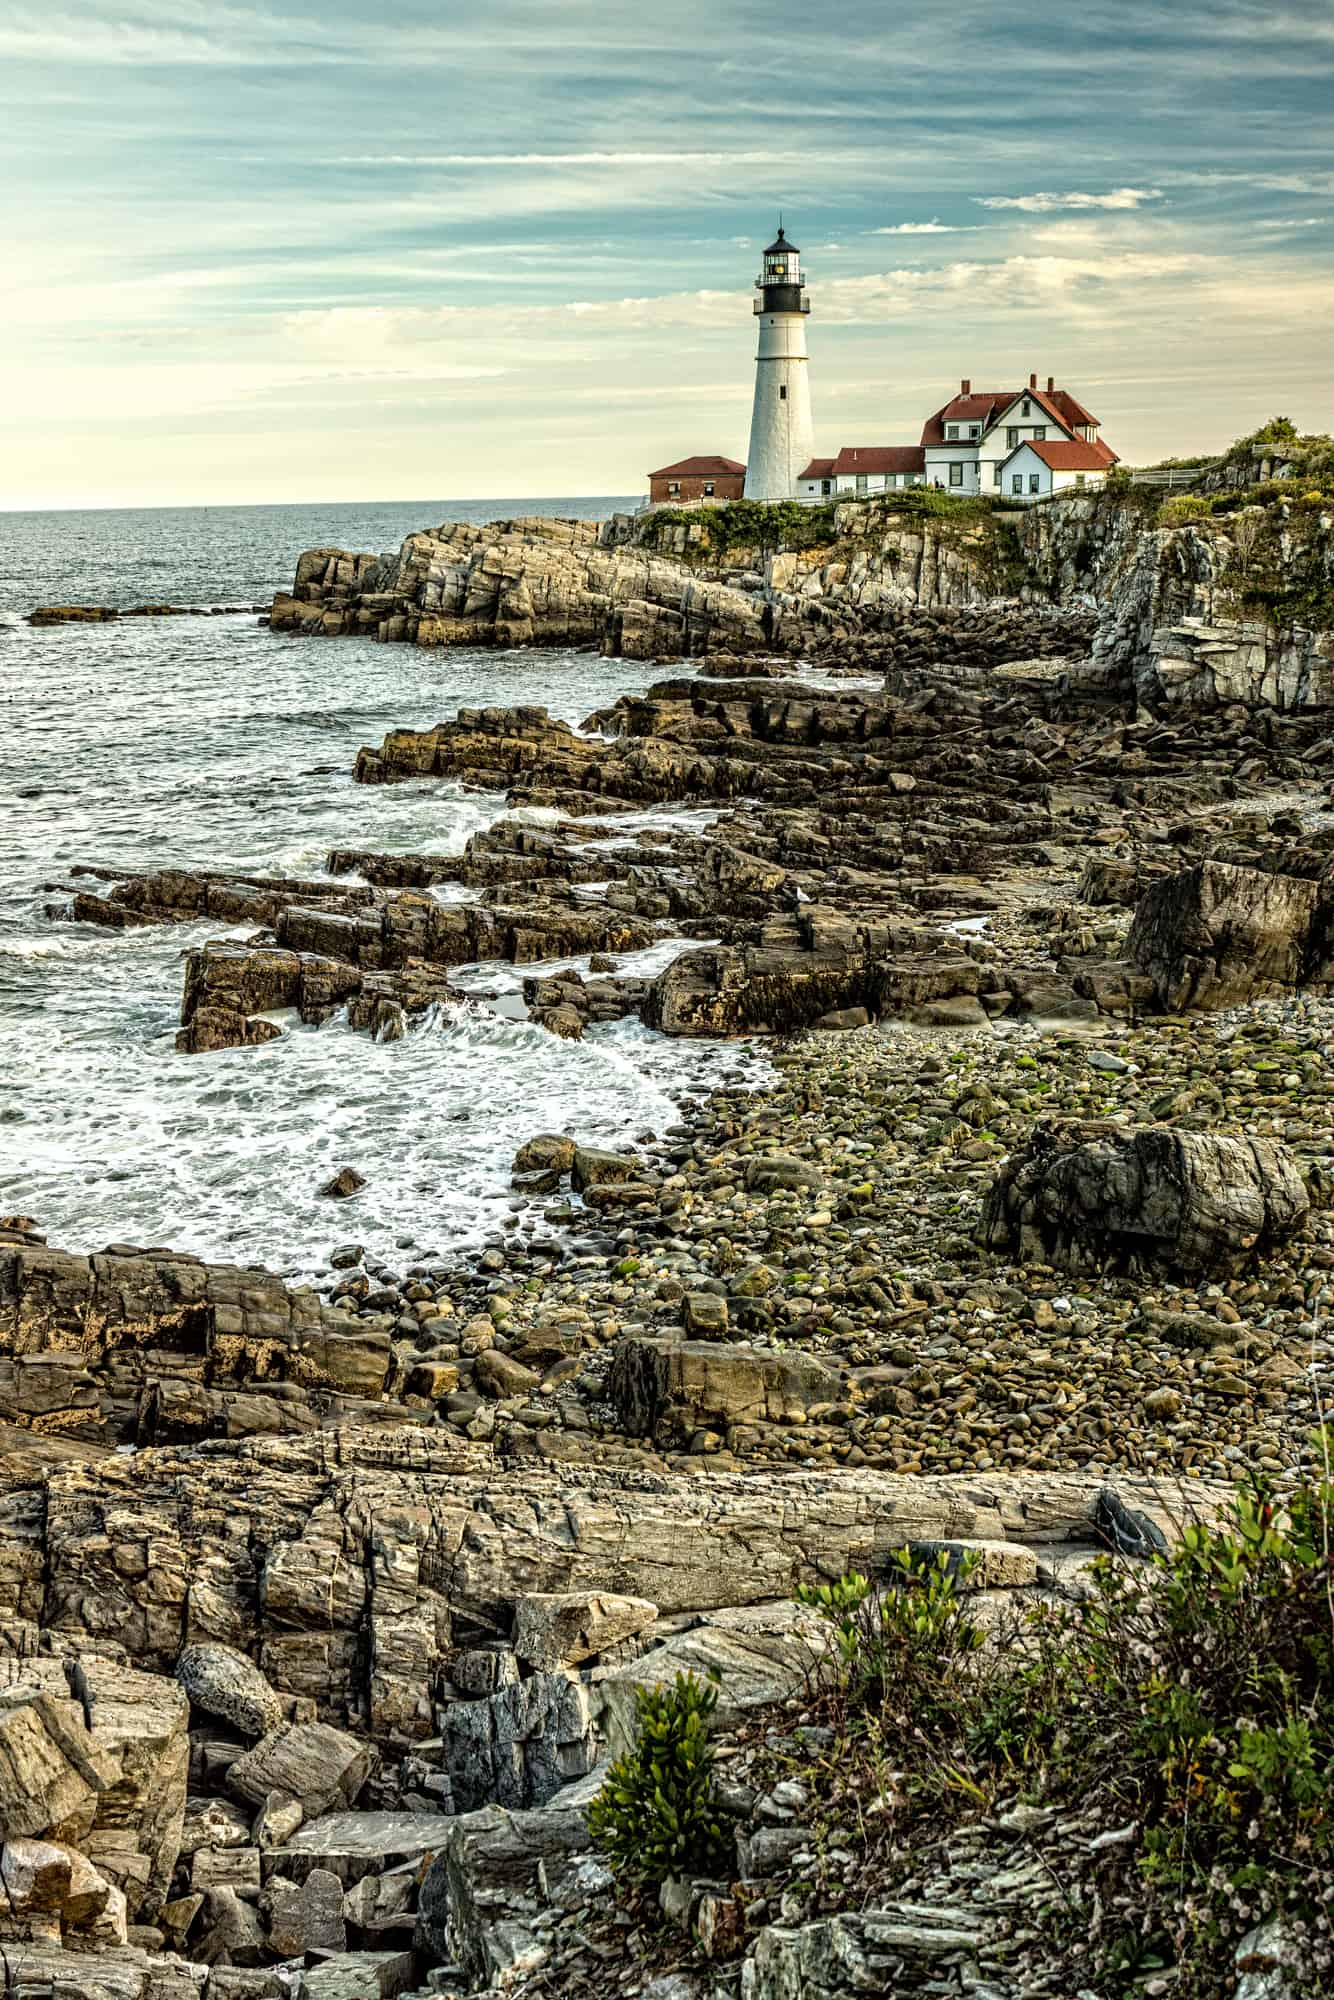 View of the landmark Portland head lighthouse in Maine.